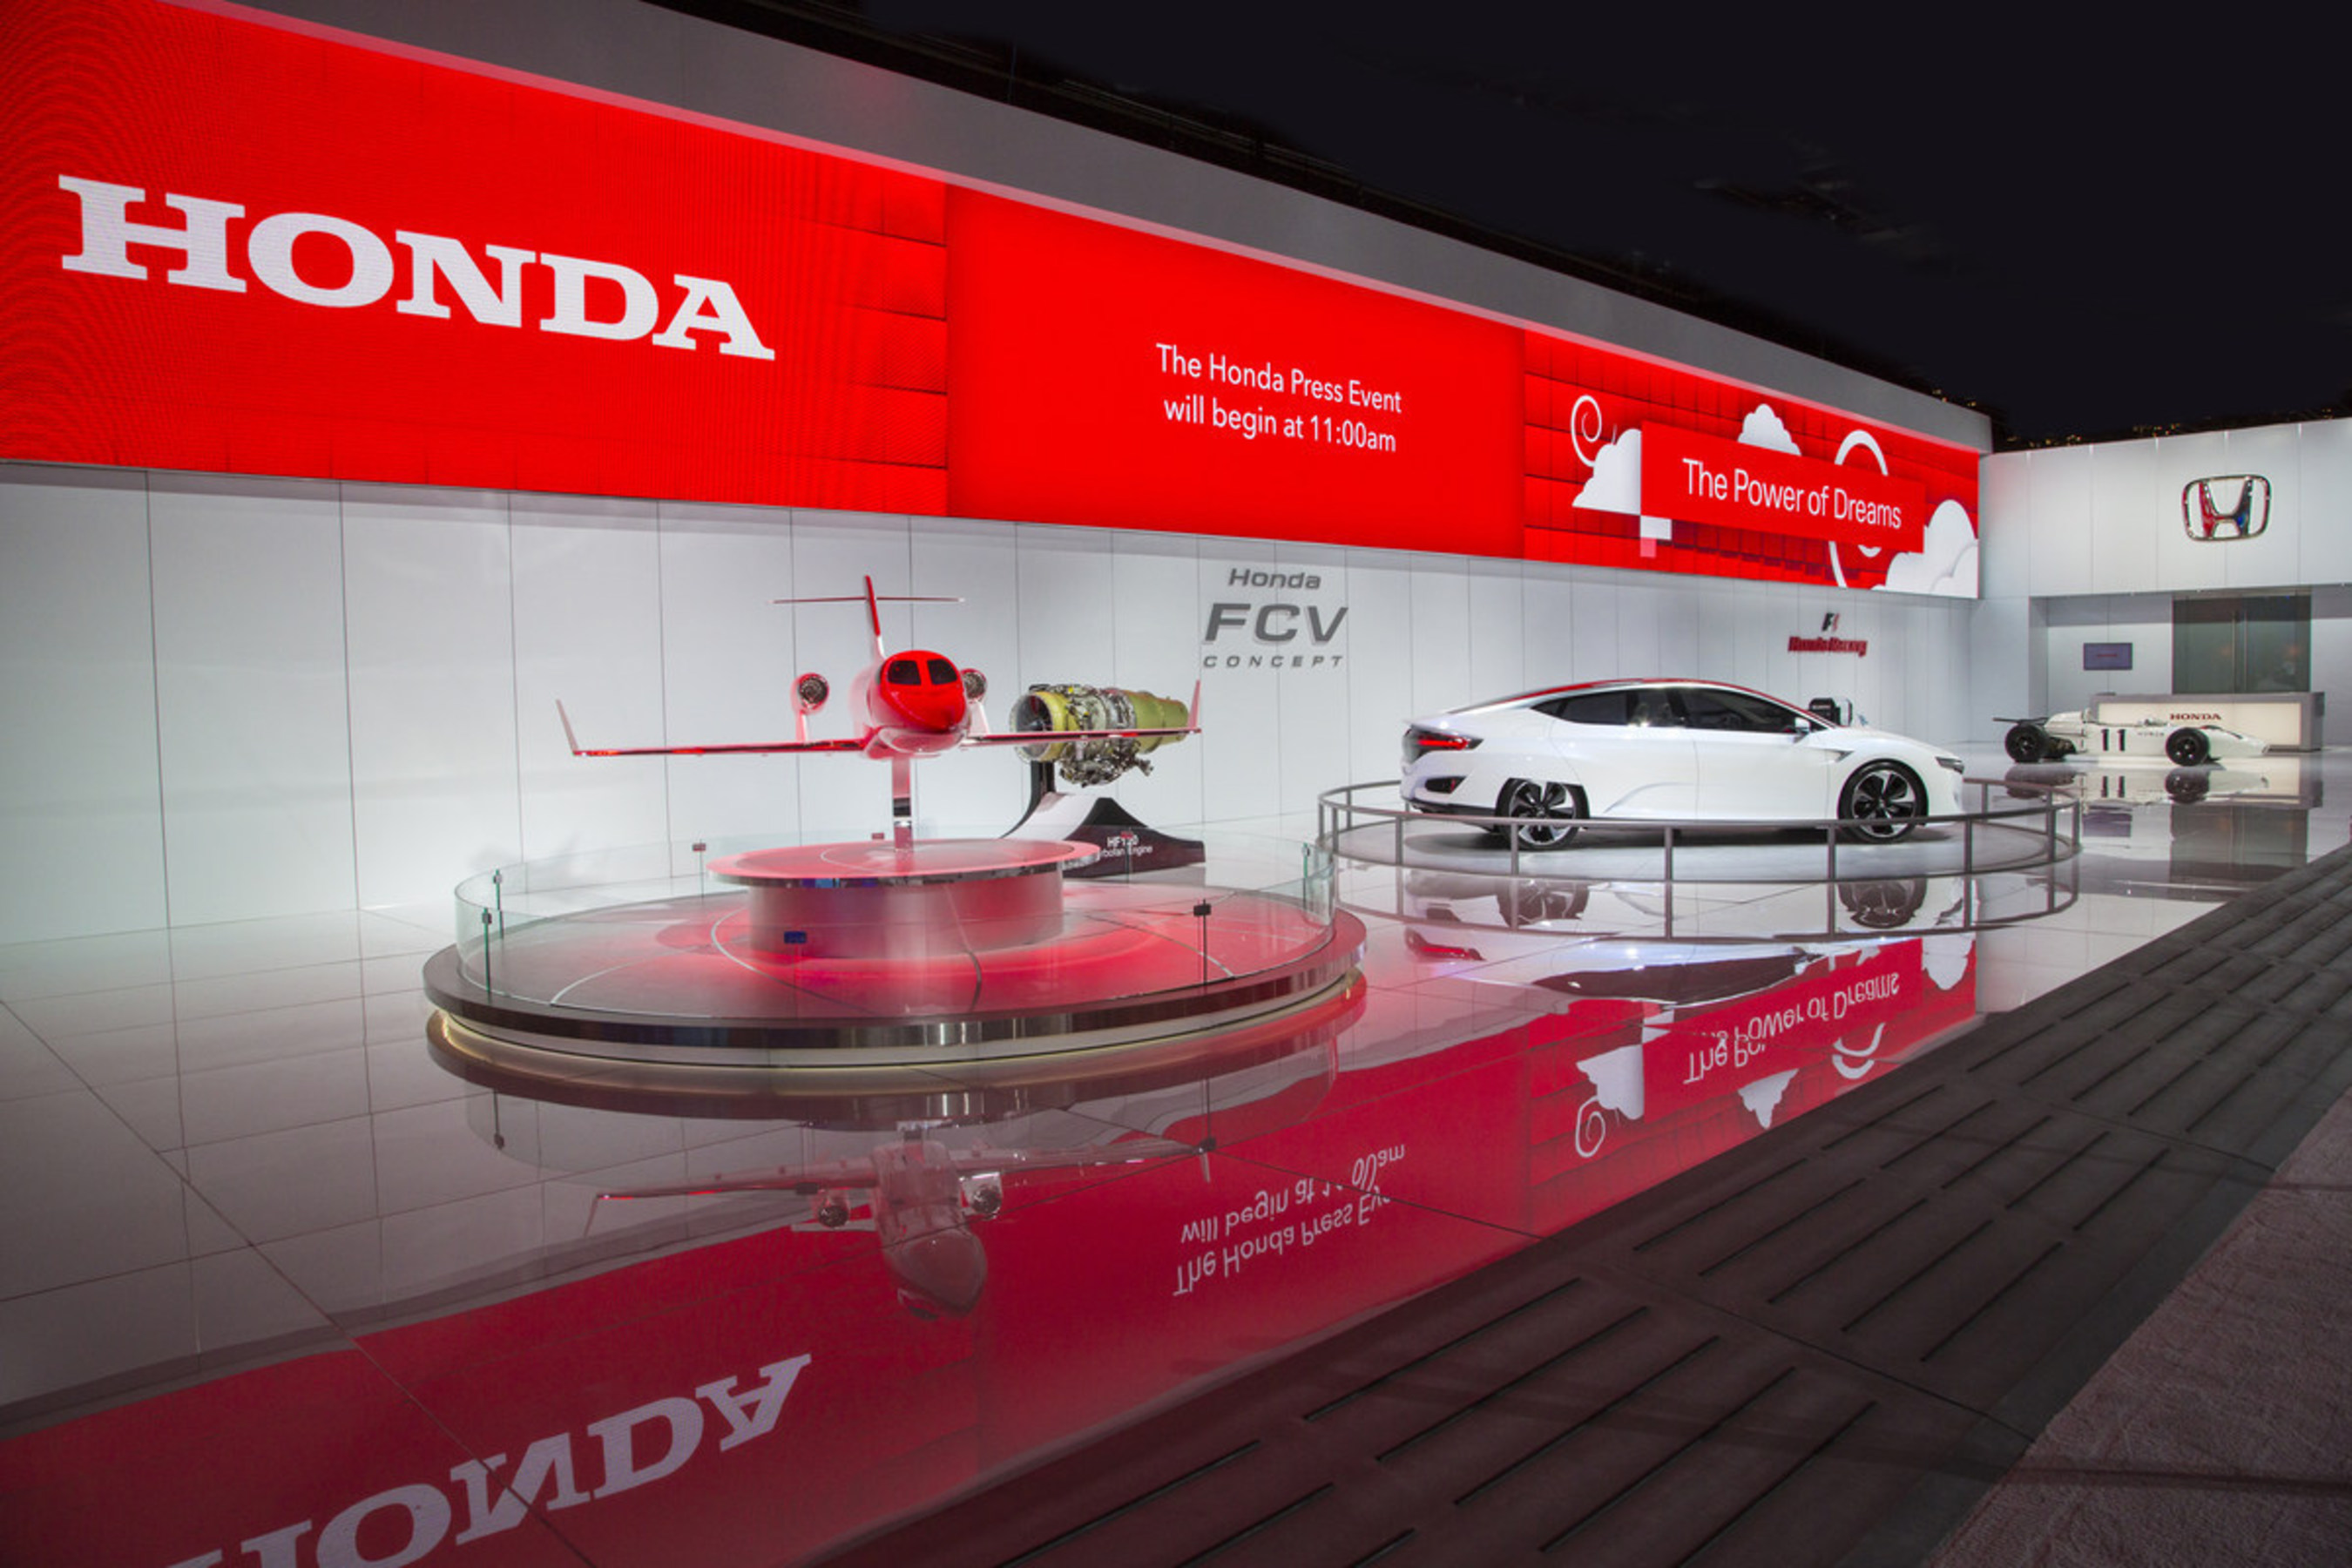 Honda Display at the 2015 North American International Auto Show features the HondaJet, FCV Concept, past and new Honda Formula 1 cars and more